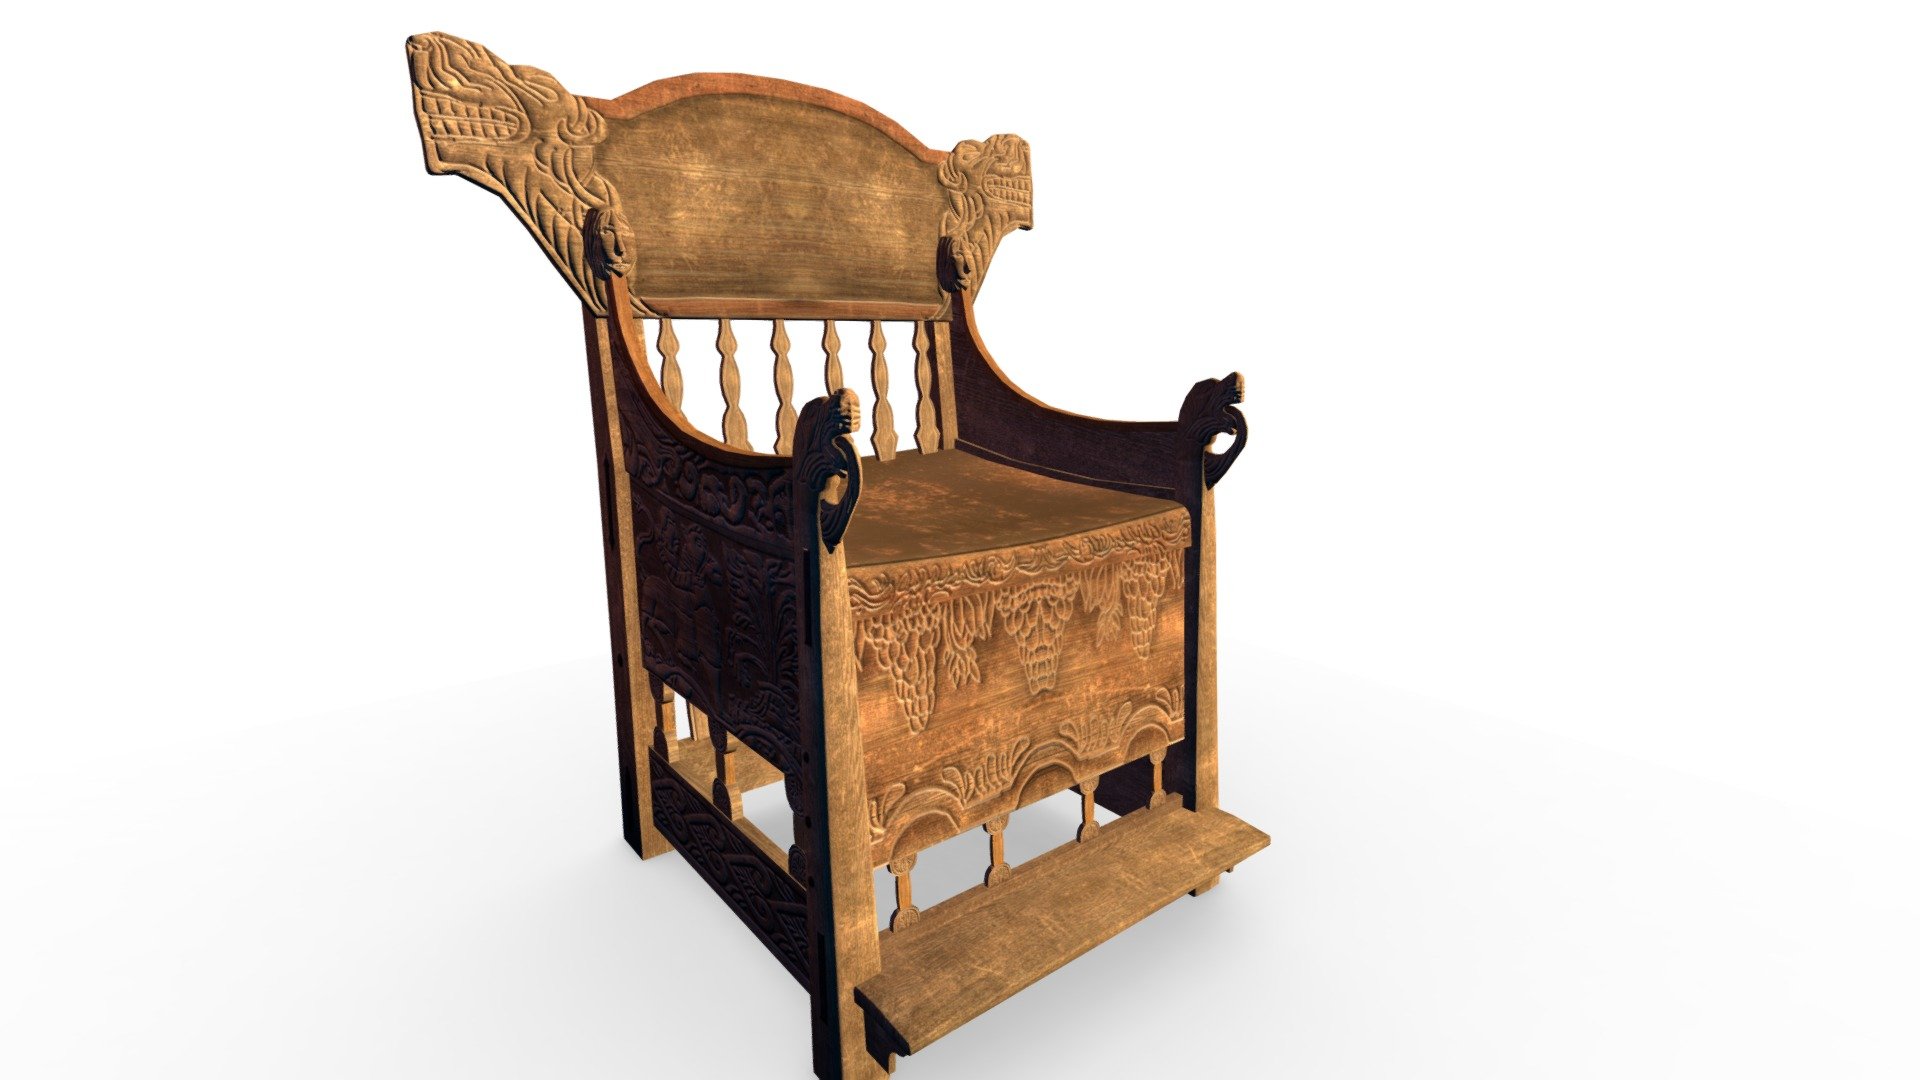 chair old norwegian-viking style - 3D model by The Ancient Forge (Svein) (@svein) 3d model